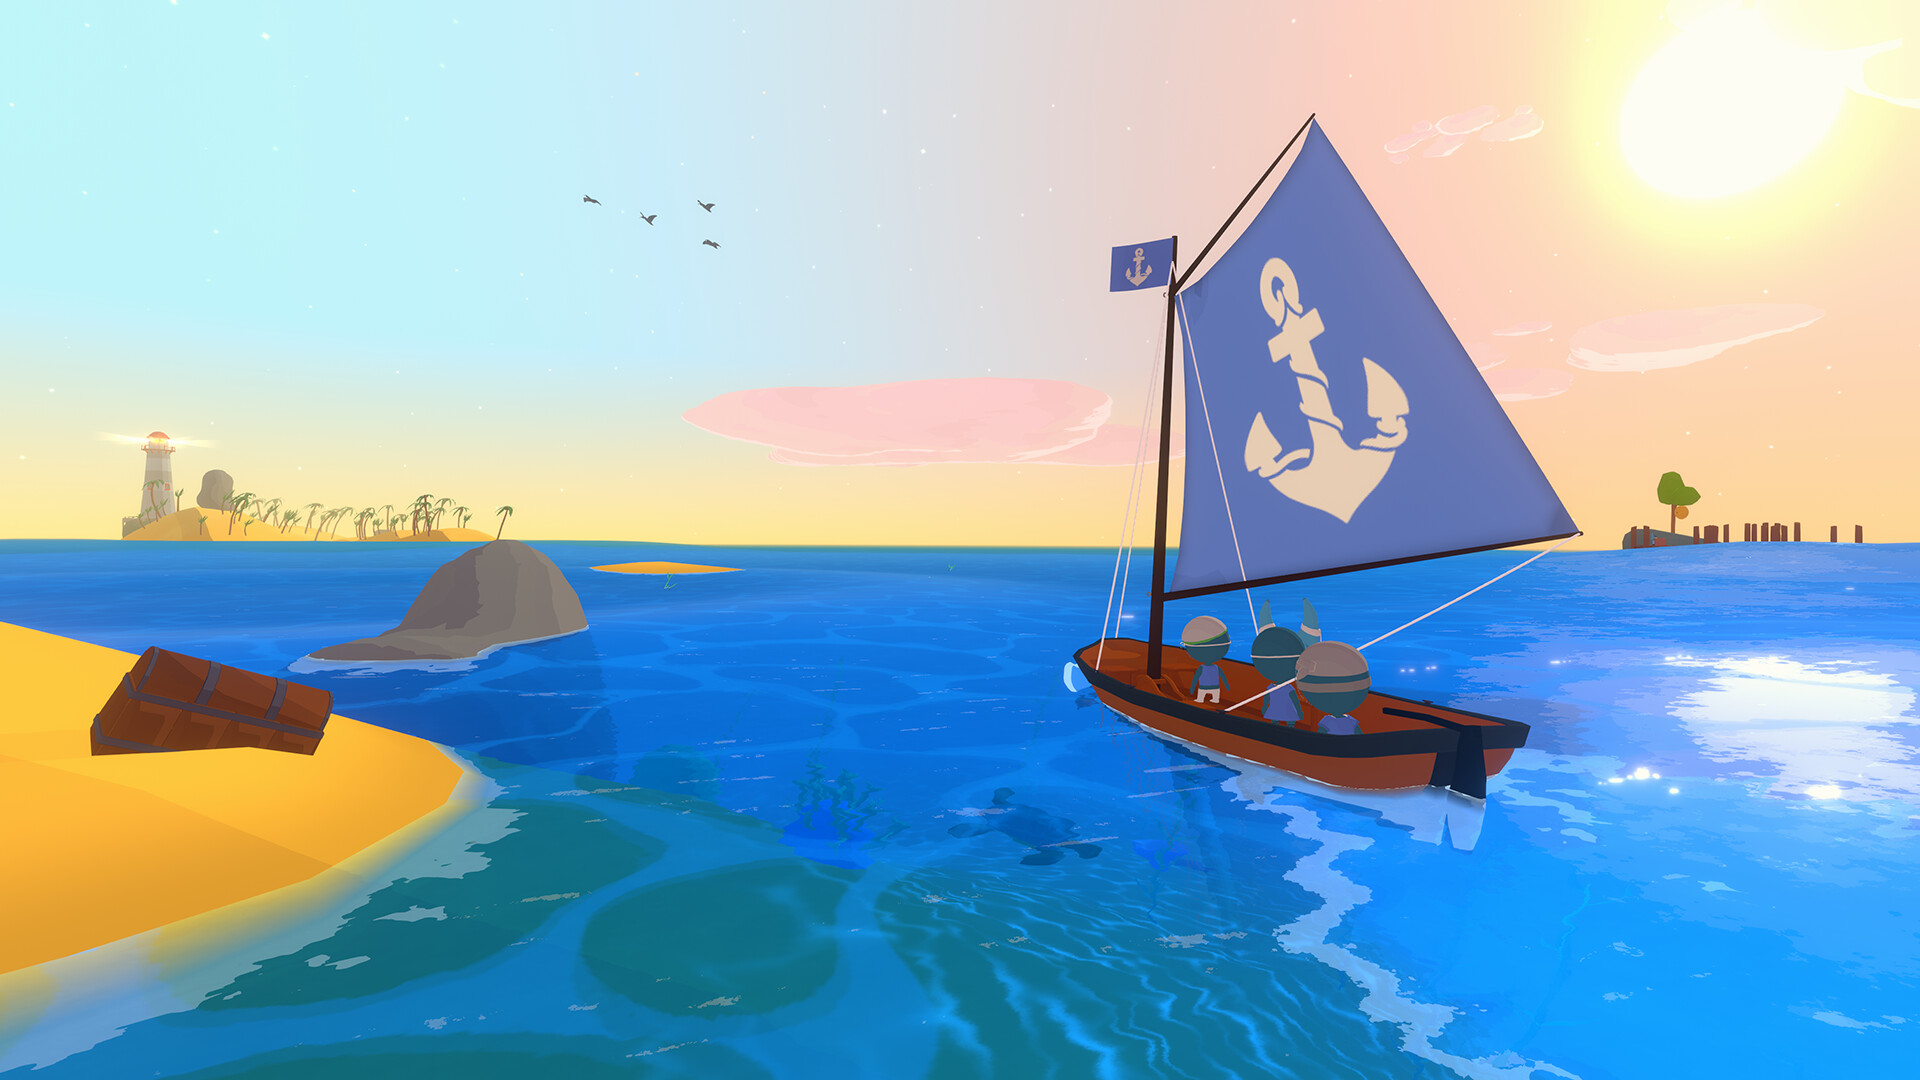 The Epic Games Store is giving away a new free game that combines exploration with Zelda: The Wind Waker